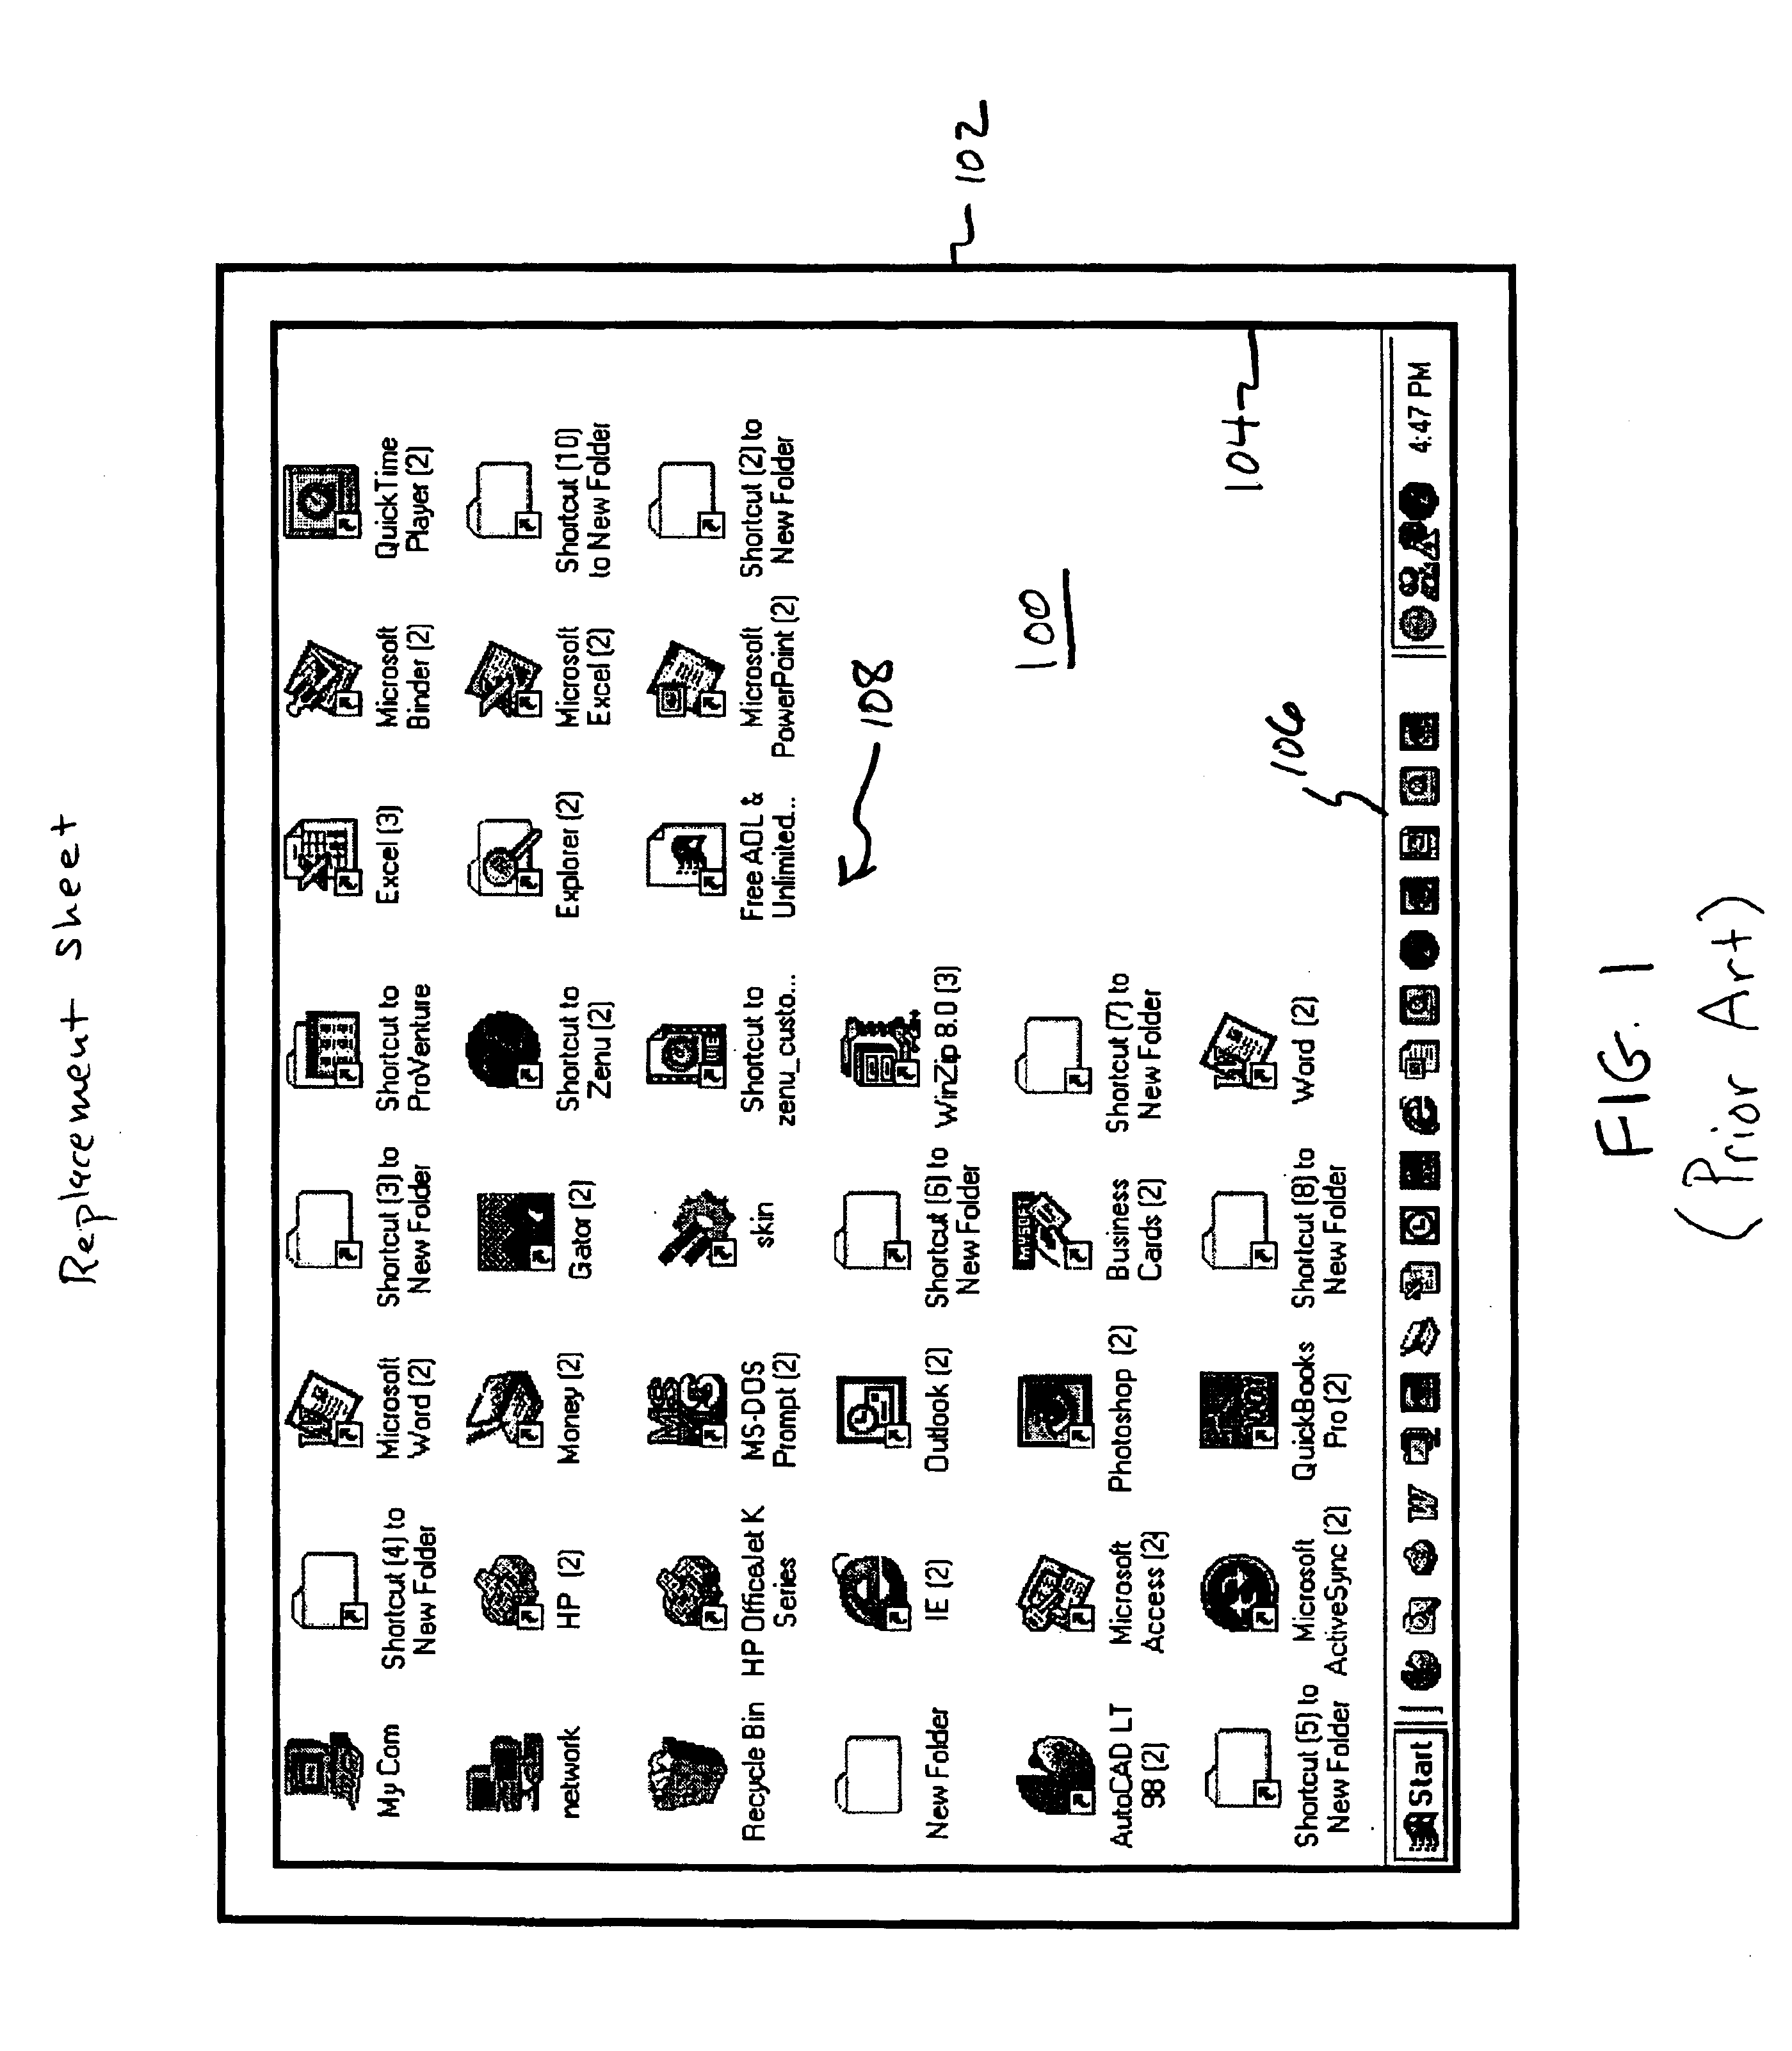 User definable interface system, method and computer program product